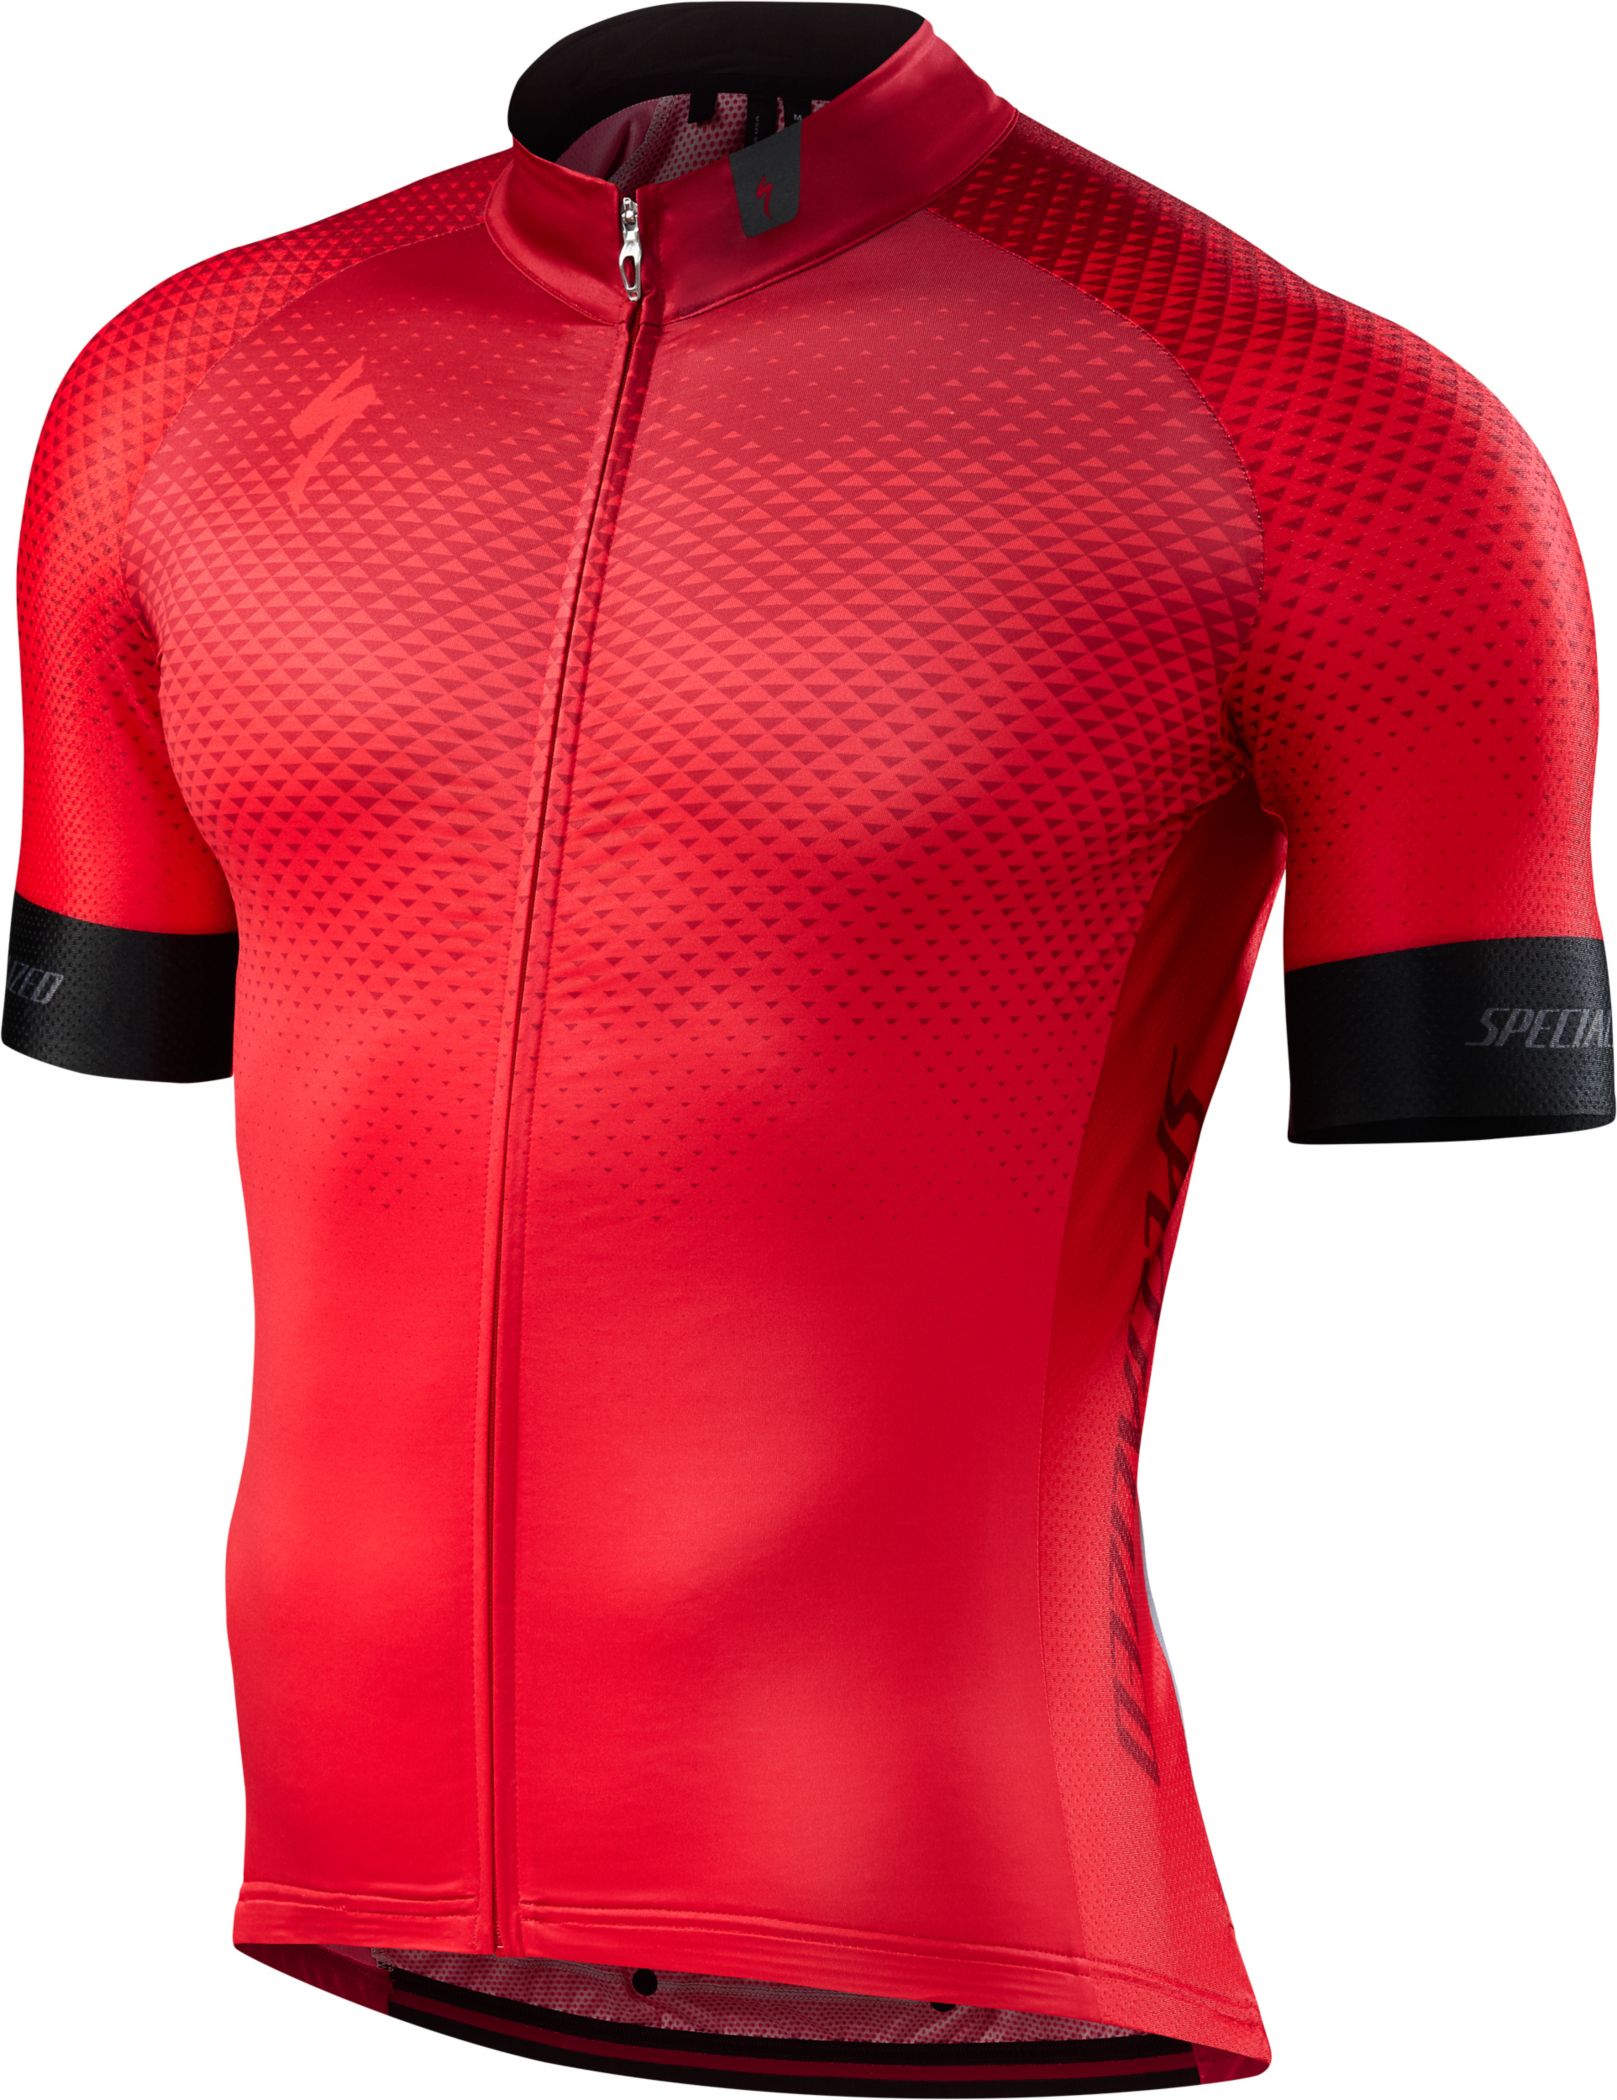 Specialized SL Pro Short Sleeve Jersey 45-48.5 Inch Chest 2018 - £22.99 ...